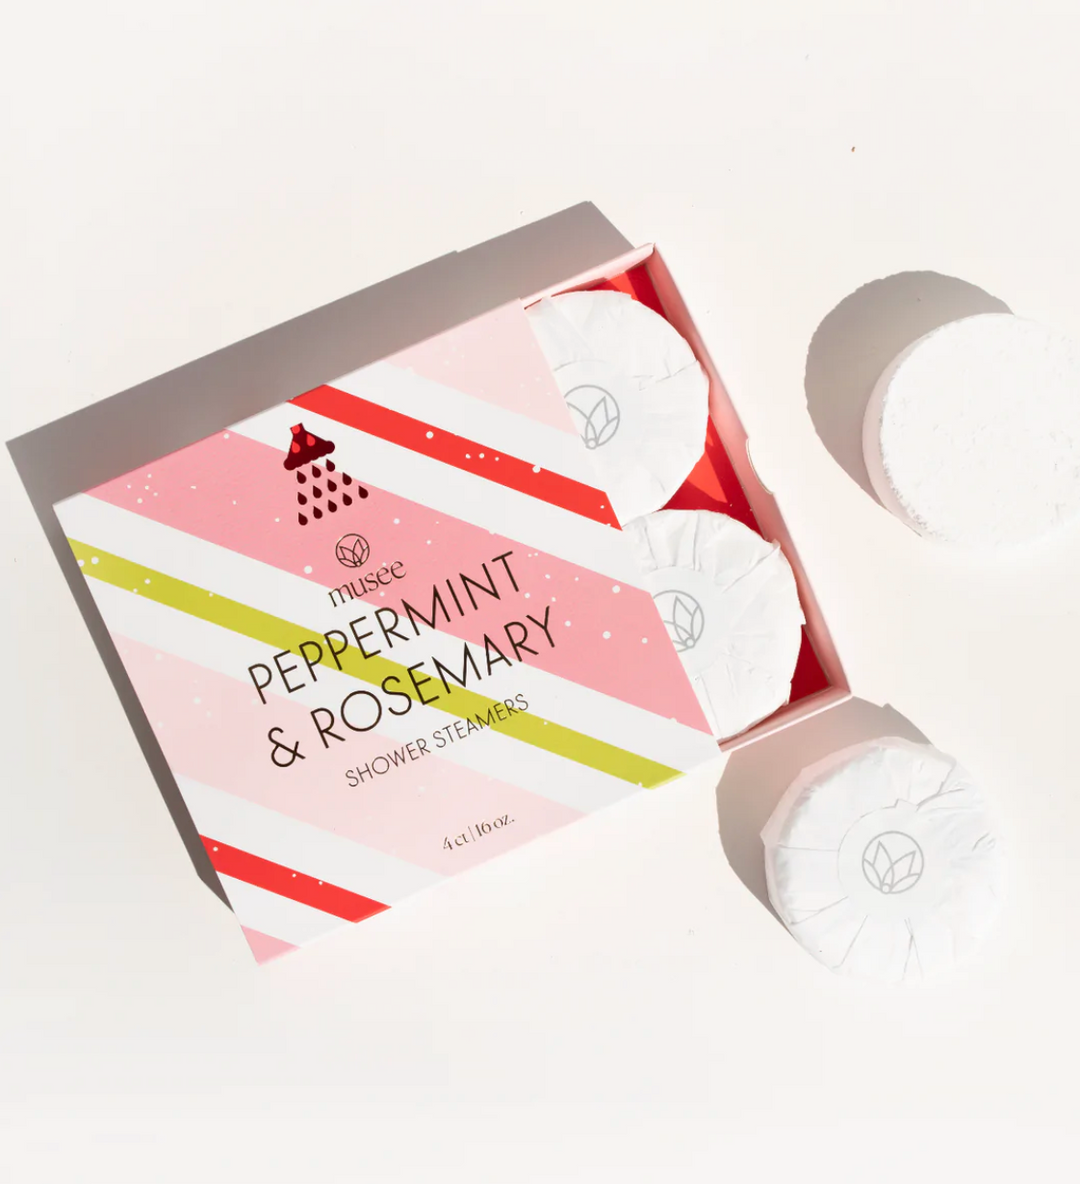 Musee:  Peppermint and Rosemary Shower Steamers